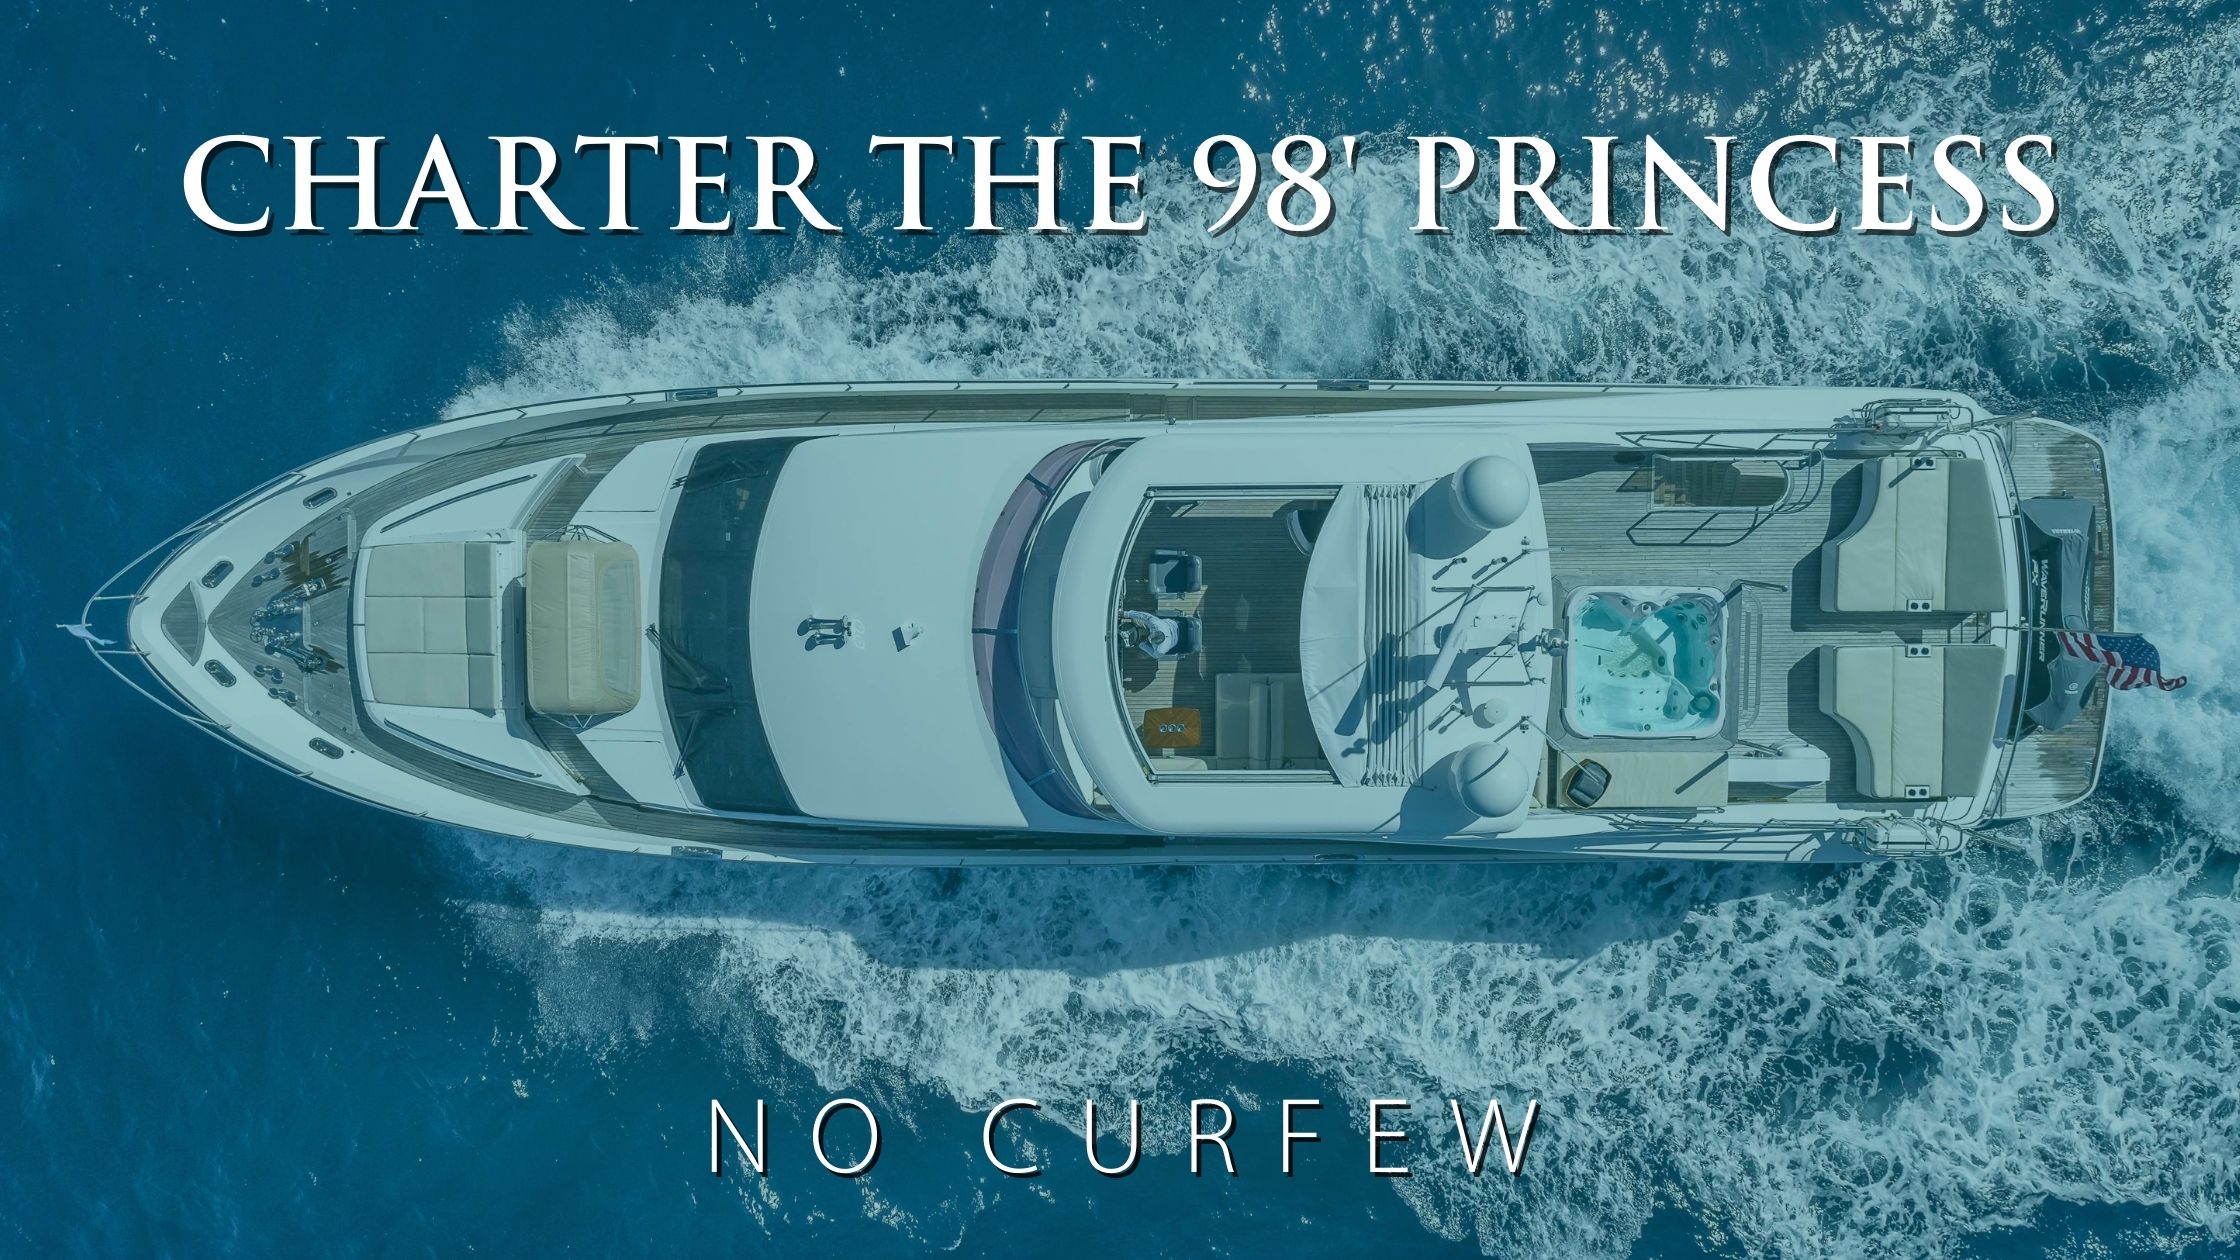 Luxury Without Limits: Chartering the 98’ Princess Yacht, NO CURFEW